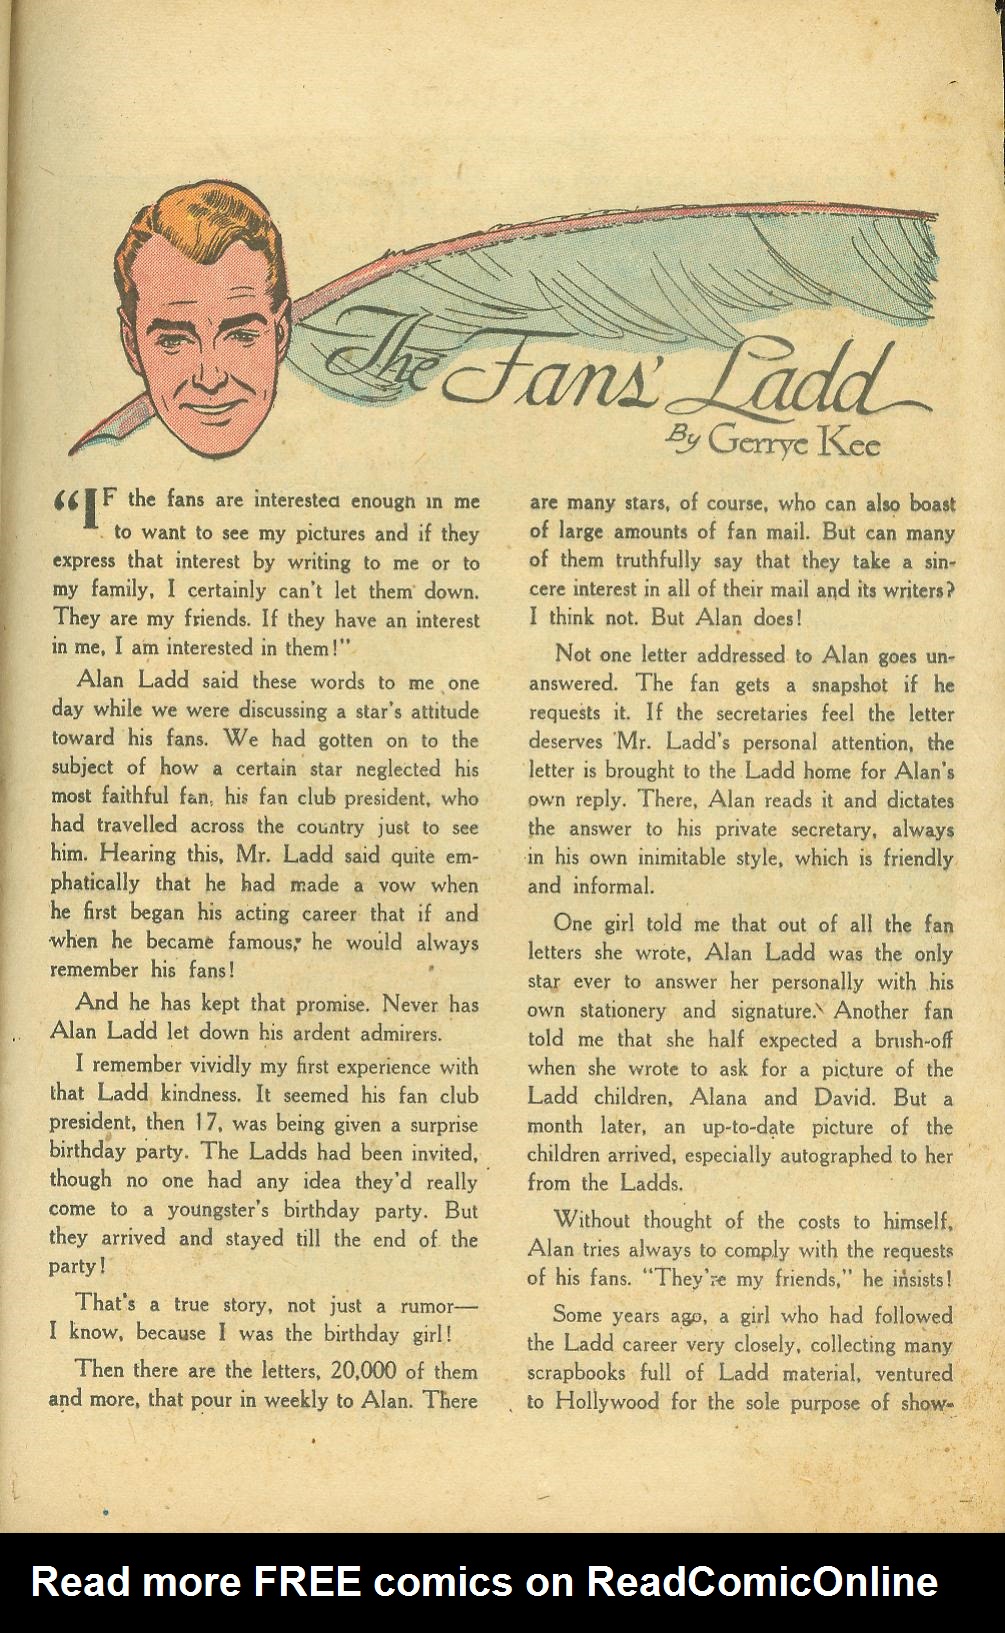 Read online Adventures of Alan Ladd comic -  Issue #7 - 37